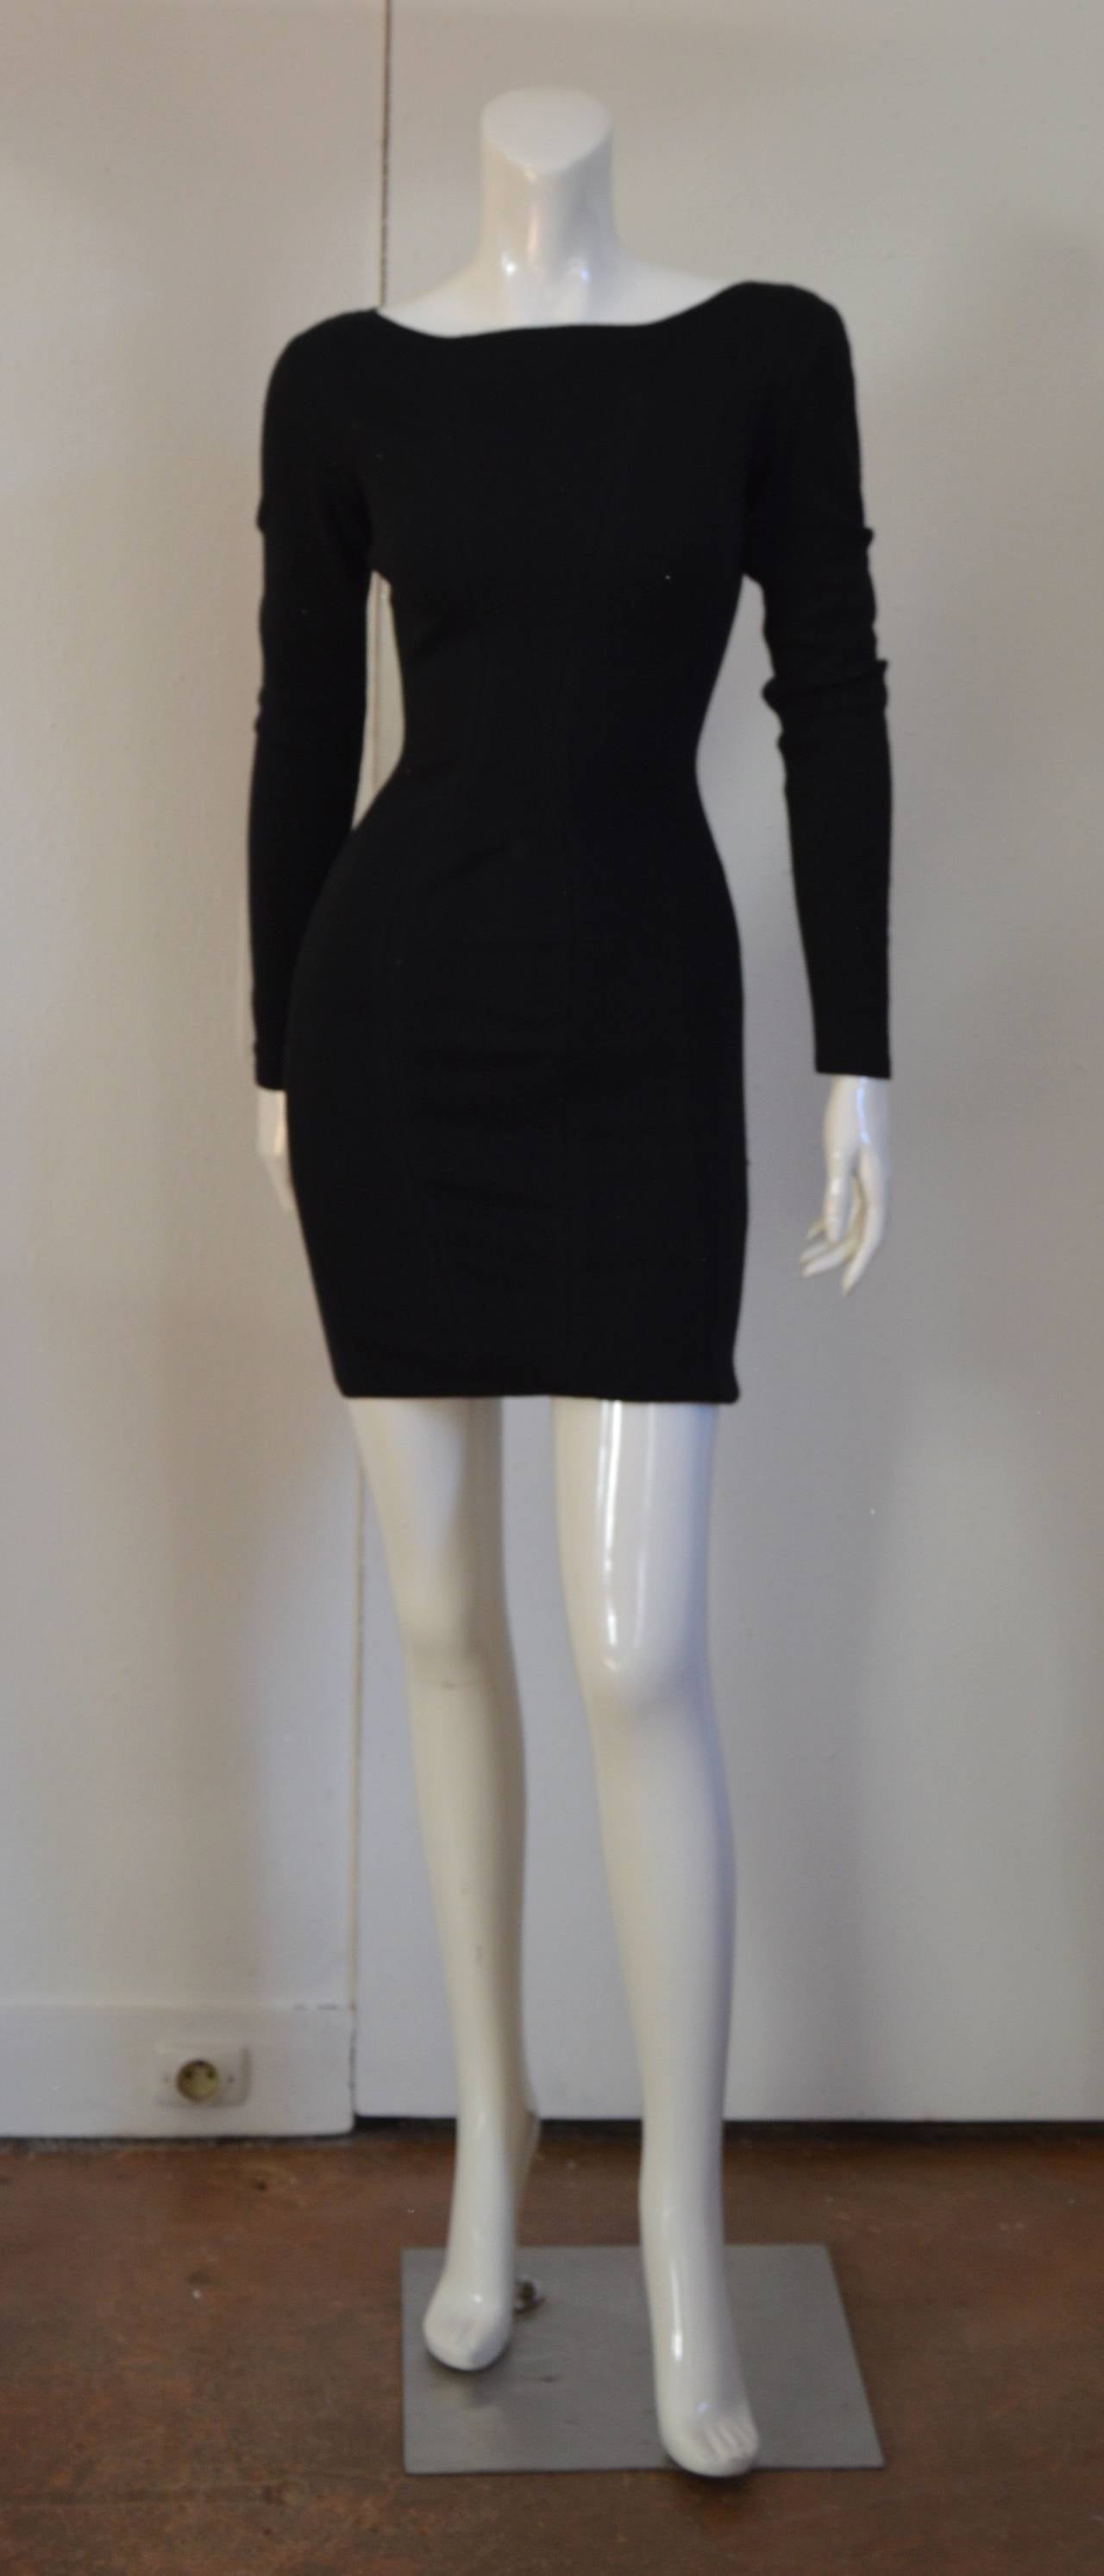 Kashmir, Wool and Viscose Jet black long sleeved mini dress designed by Azzedine Alaia dating to 1990. Labeled a size XS, although this can easily fit a size small as well. Zips up center back. Excellent condition.